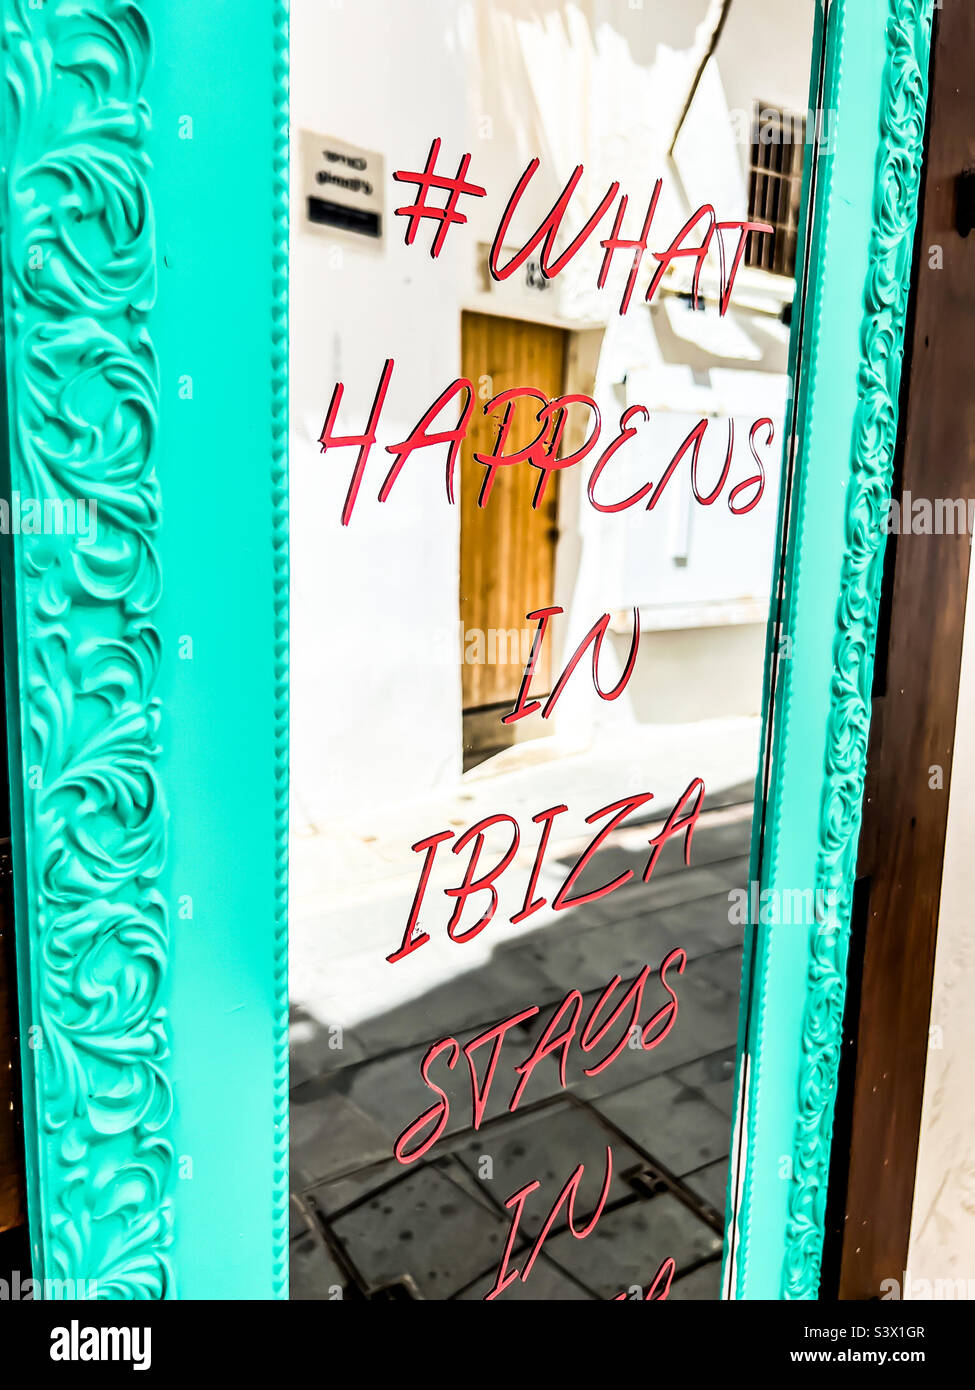 #What happens in Ibiza stays in Ibiza on a mirror in Ibiza Foto Stock